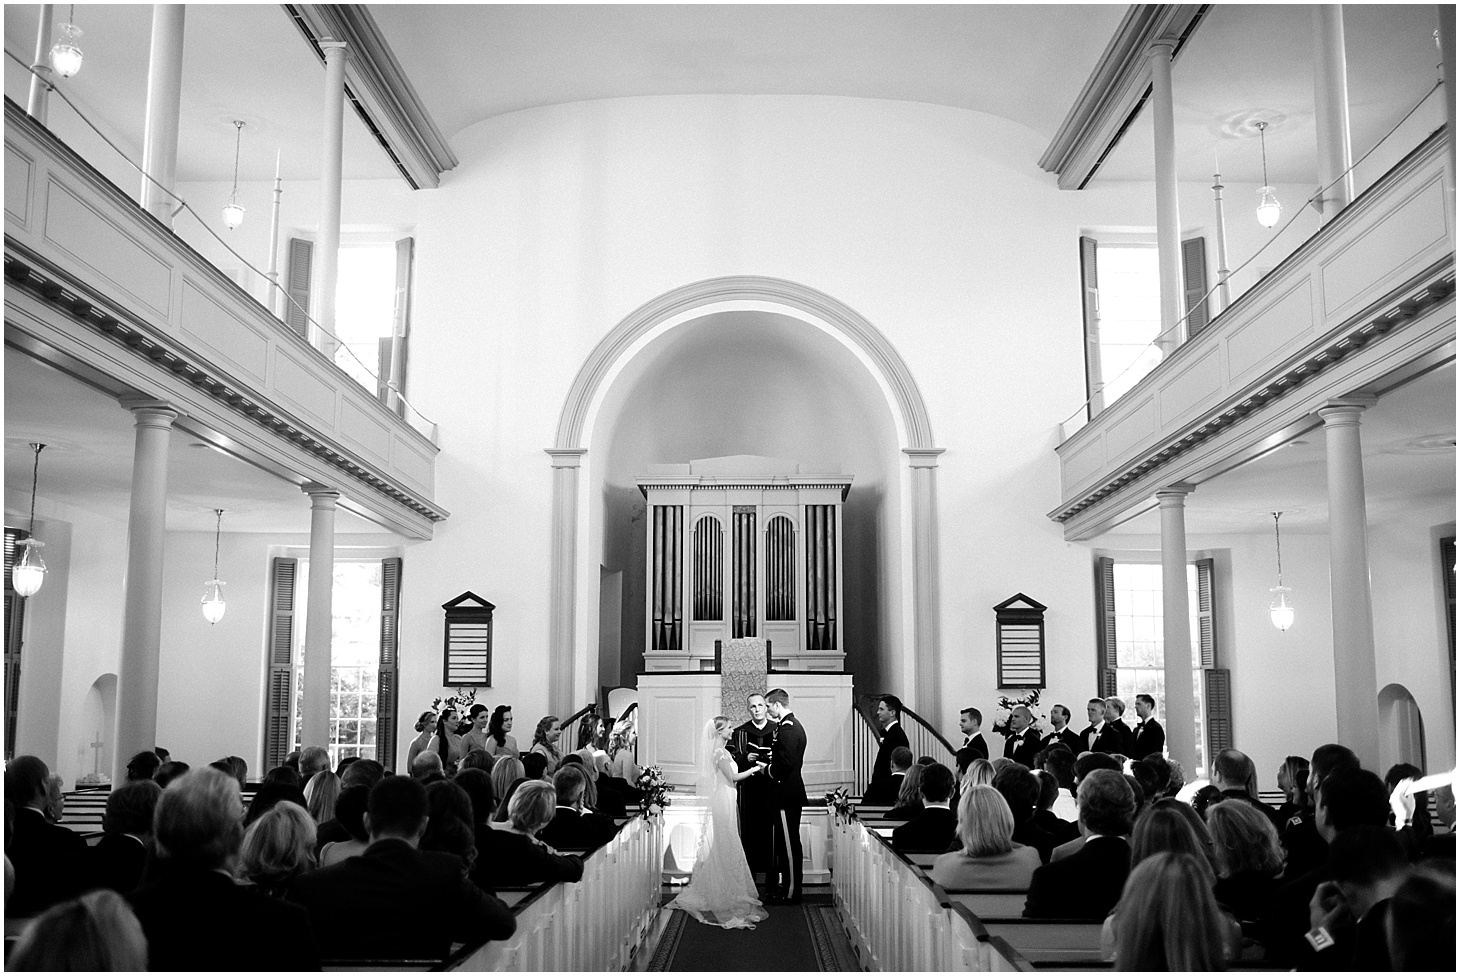 Old Presbyterian Meeting House Ceremony | Southern Black Tie wedding at St. Regis DC in Dusty Blue and Ivory | Sarah Bradshaw Photography